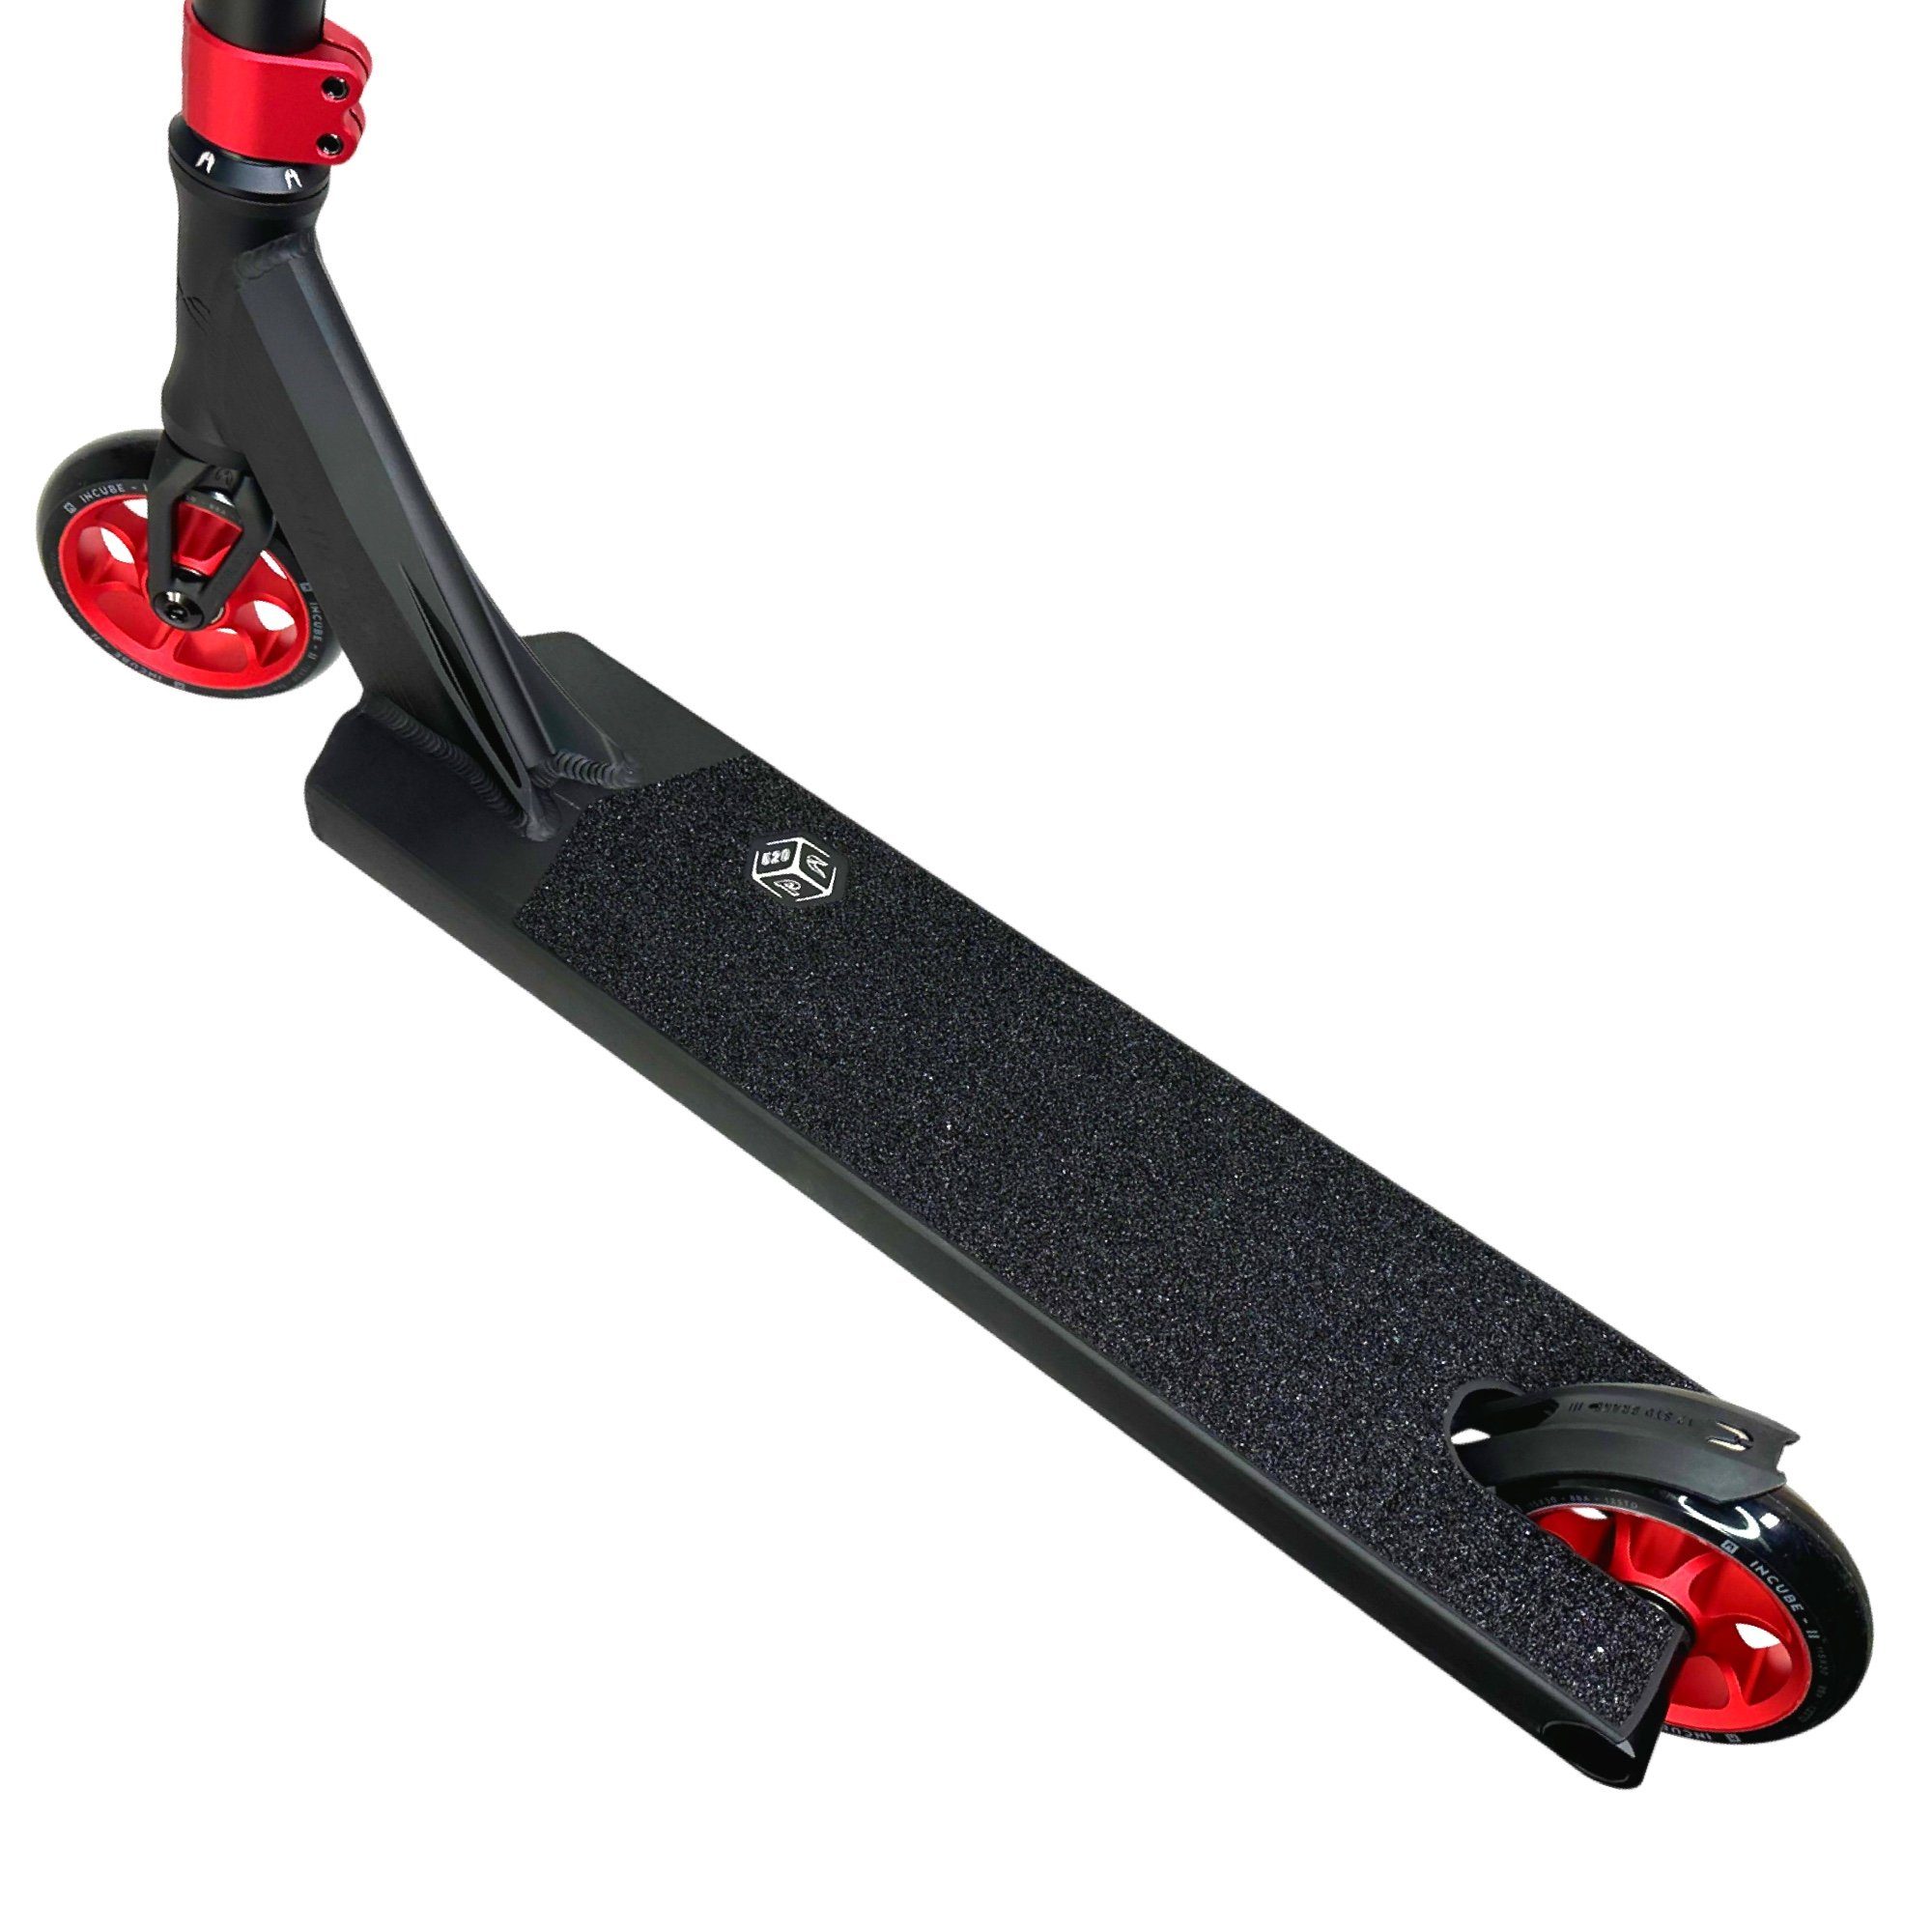 Ethic Stuntscooter Ethic DTC Rot 3,35kg Stunt-Scooter M Pandora H=85cm DTC